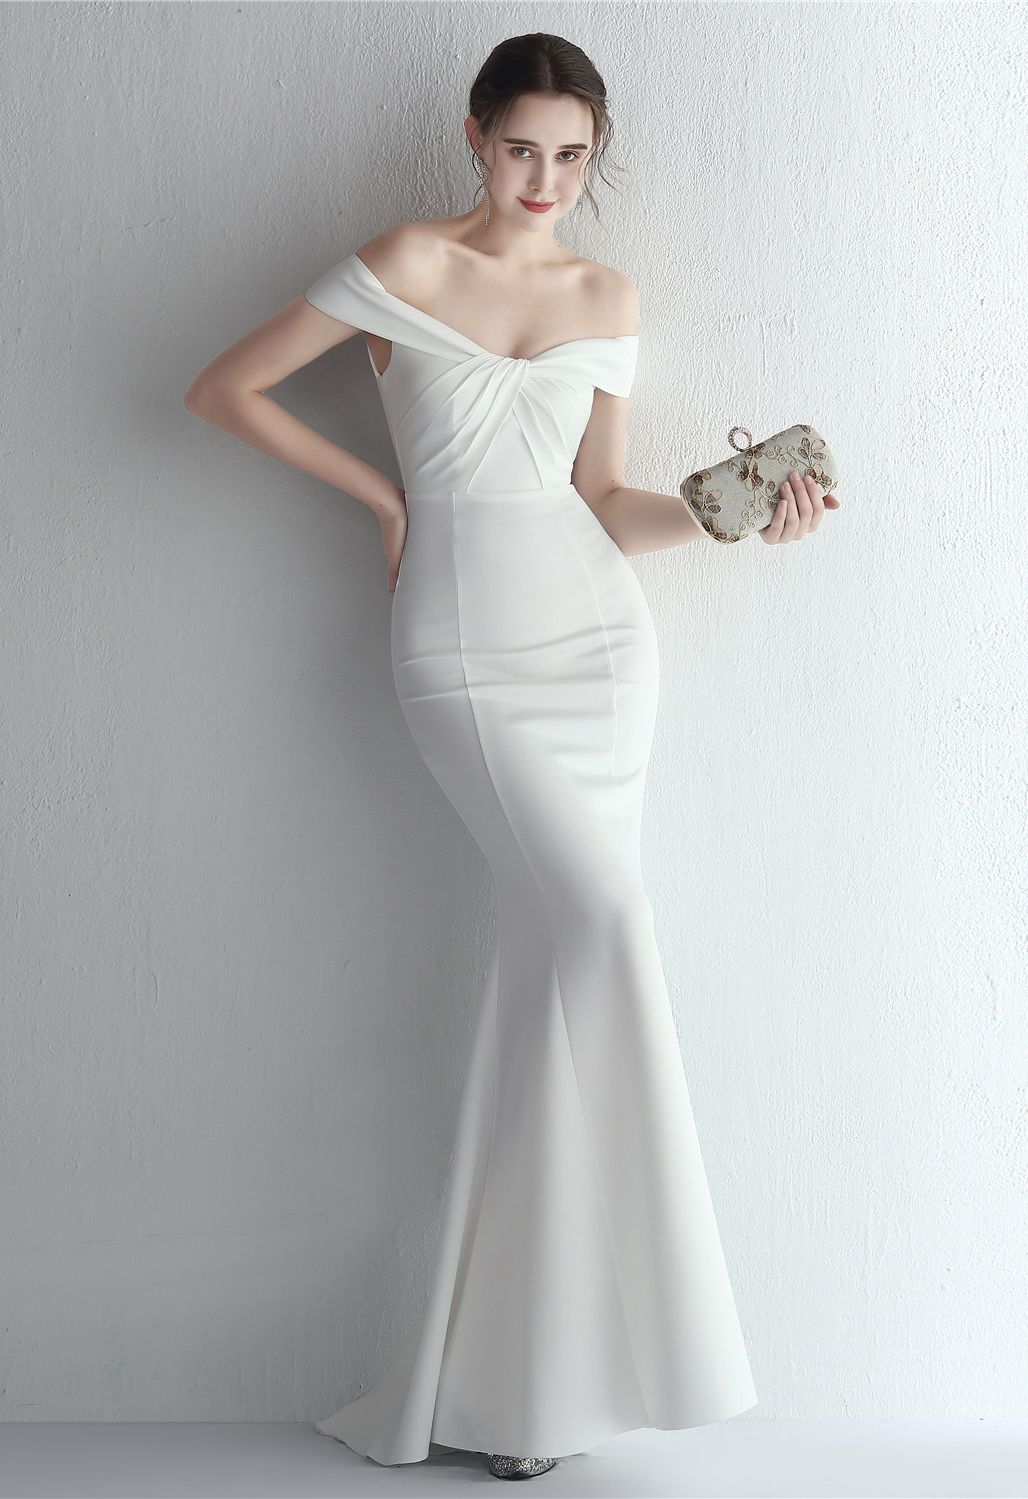 Twist Front Off-Shoulder Gown in White - Retro, Indie and Unique Fashion